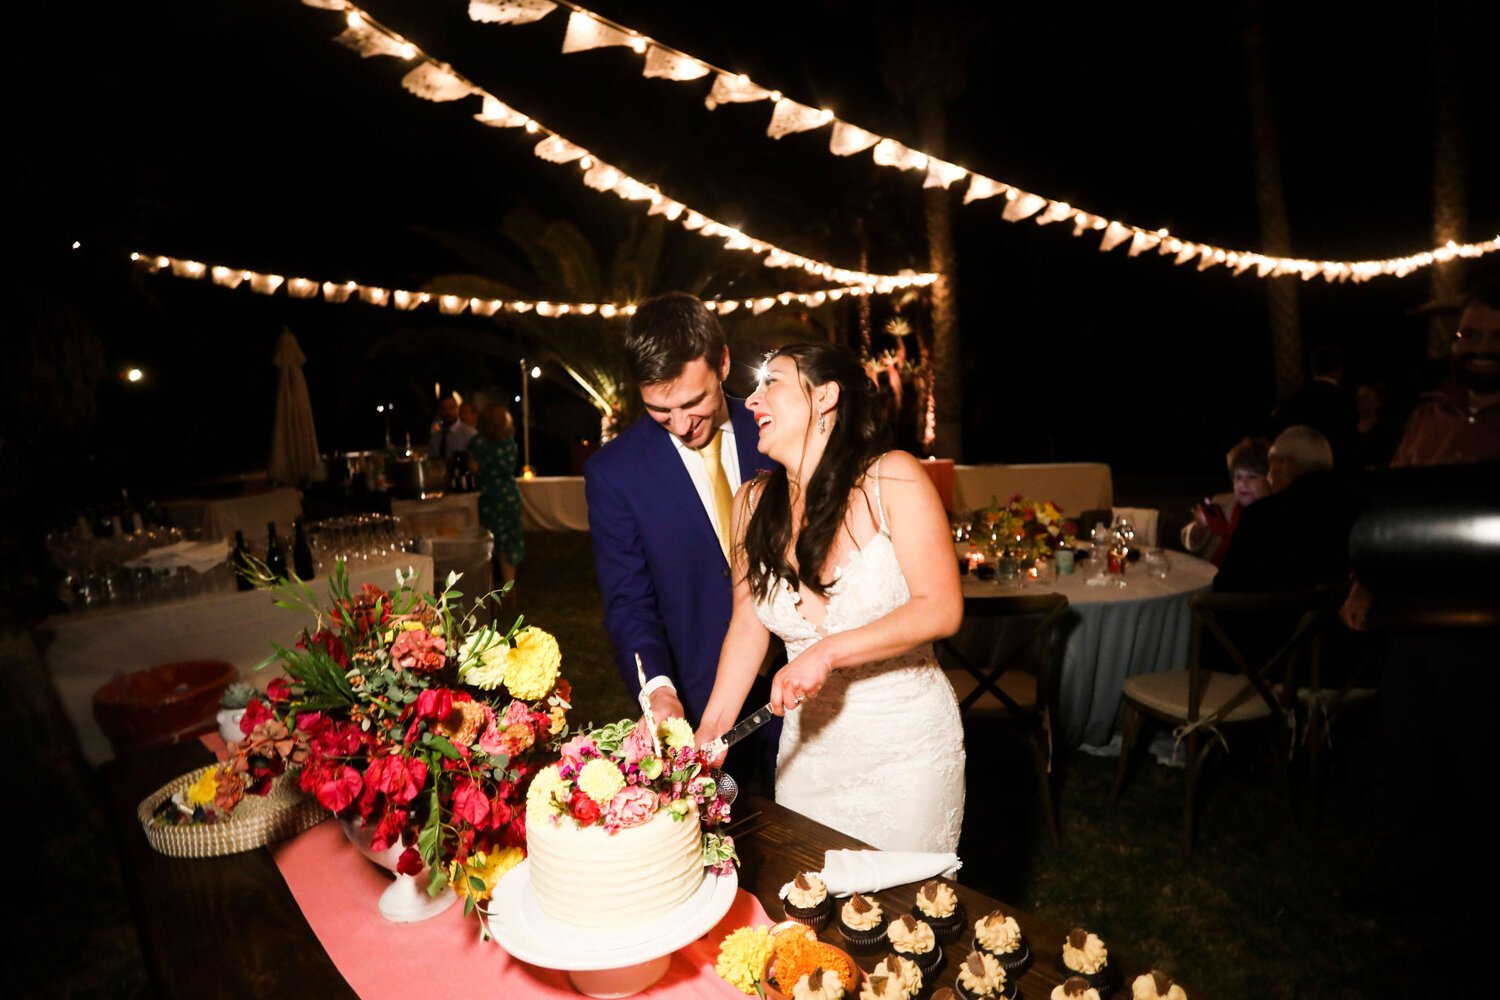 www.santabarbarawedding.com | Nightingale Photography | Rancho Dos Pueblos | Wild Hearts Events | Knot Just Flowers | The Wild Posy | This Good Mood | Bride and Groom Cut the Cake 